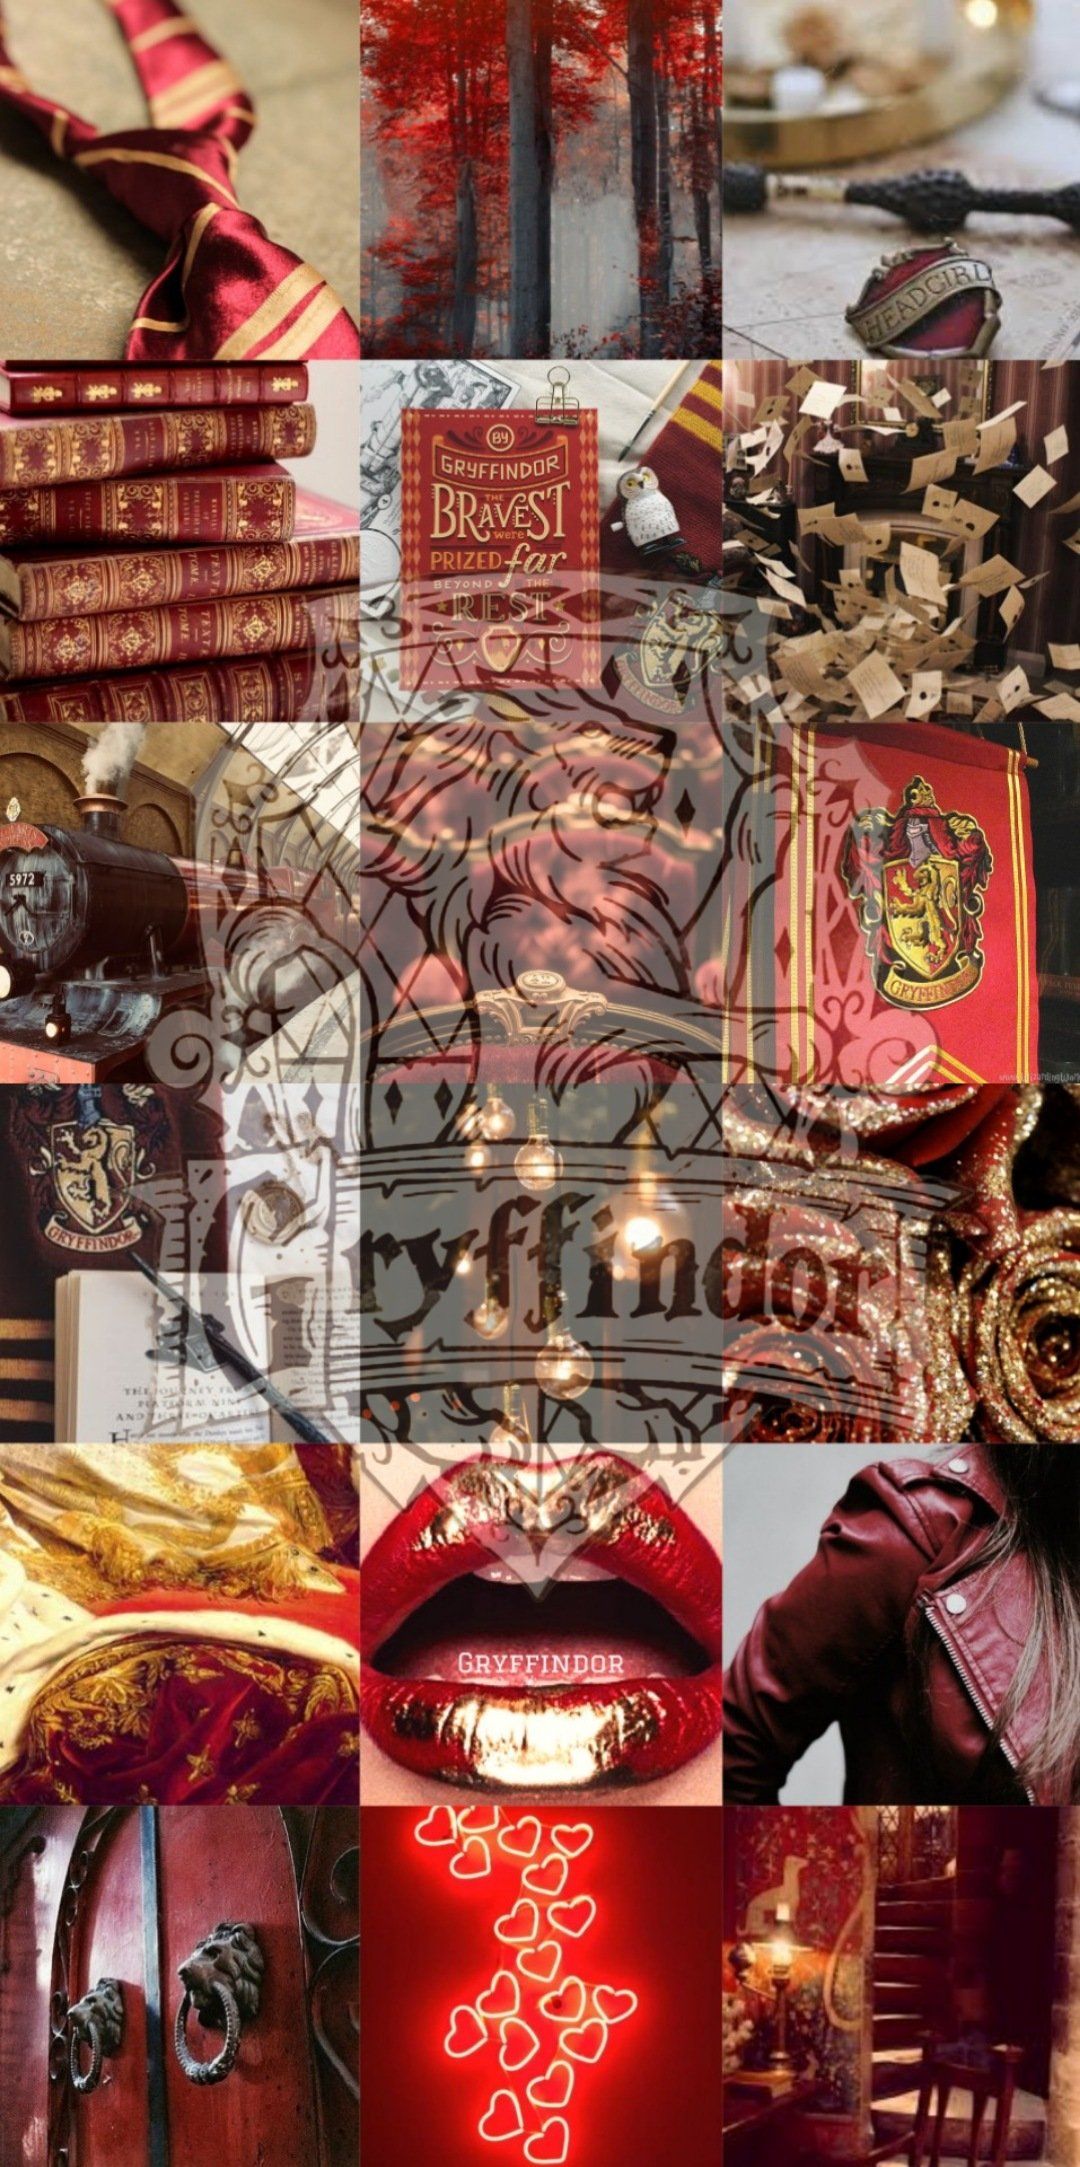 Cyndel Schofield made some #harrypotter aesthetic background. I think they came out ✨fabulous✨ #Gryffindor #Slytherin #hufflepuff #Ravenclaw #wallpaper #aesthetic #harrypotteraesthetic